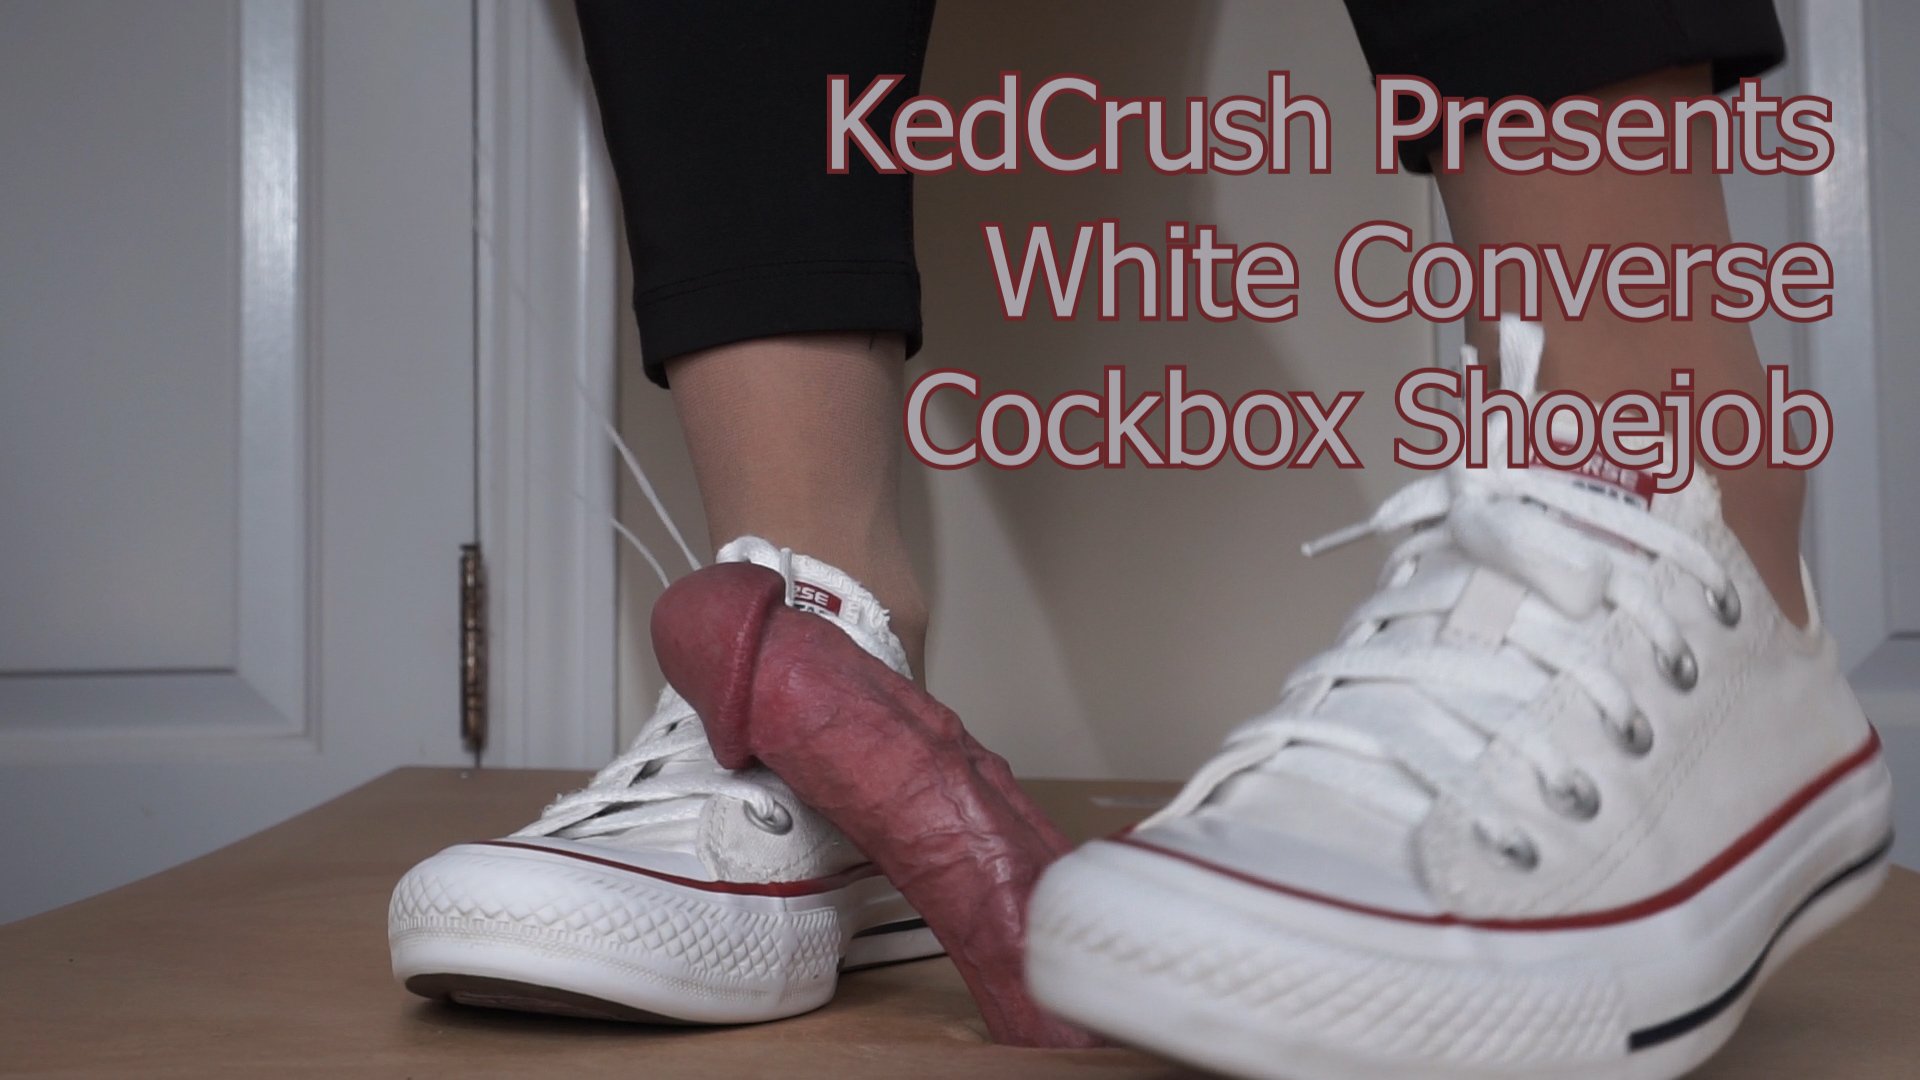 Accumulatie Gluren Onrecht Ked Crush on Twitter: "Just posted a new converse shoejob clip. This  cockbox shoejob is pretty intense. Check it out! @C4SUpdates @RT_Converse  #shoejob #sneakershoejob #cbt #femdom #conversefetish  https://t.co/qykbQYc4eS https://t.co/eTfTpCU3pu" / Twitter